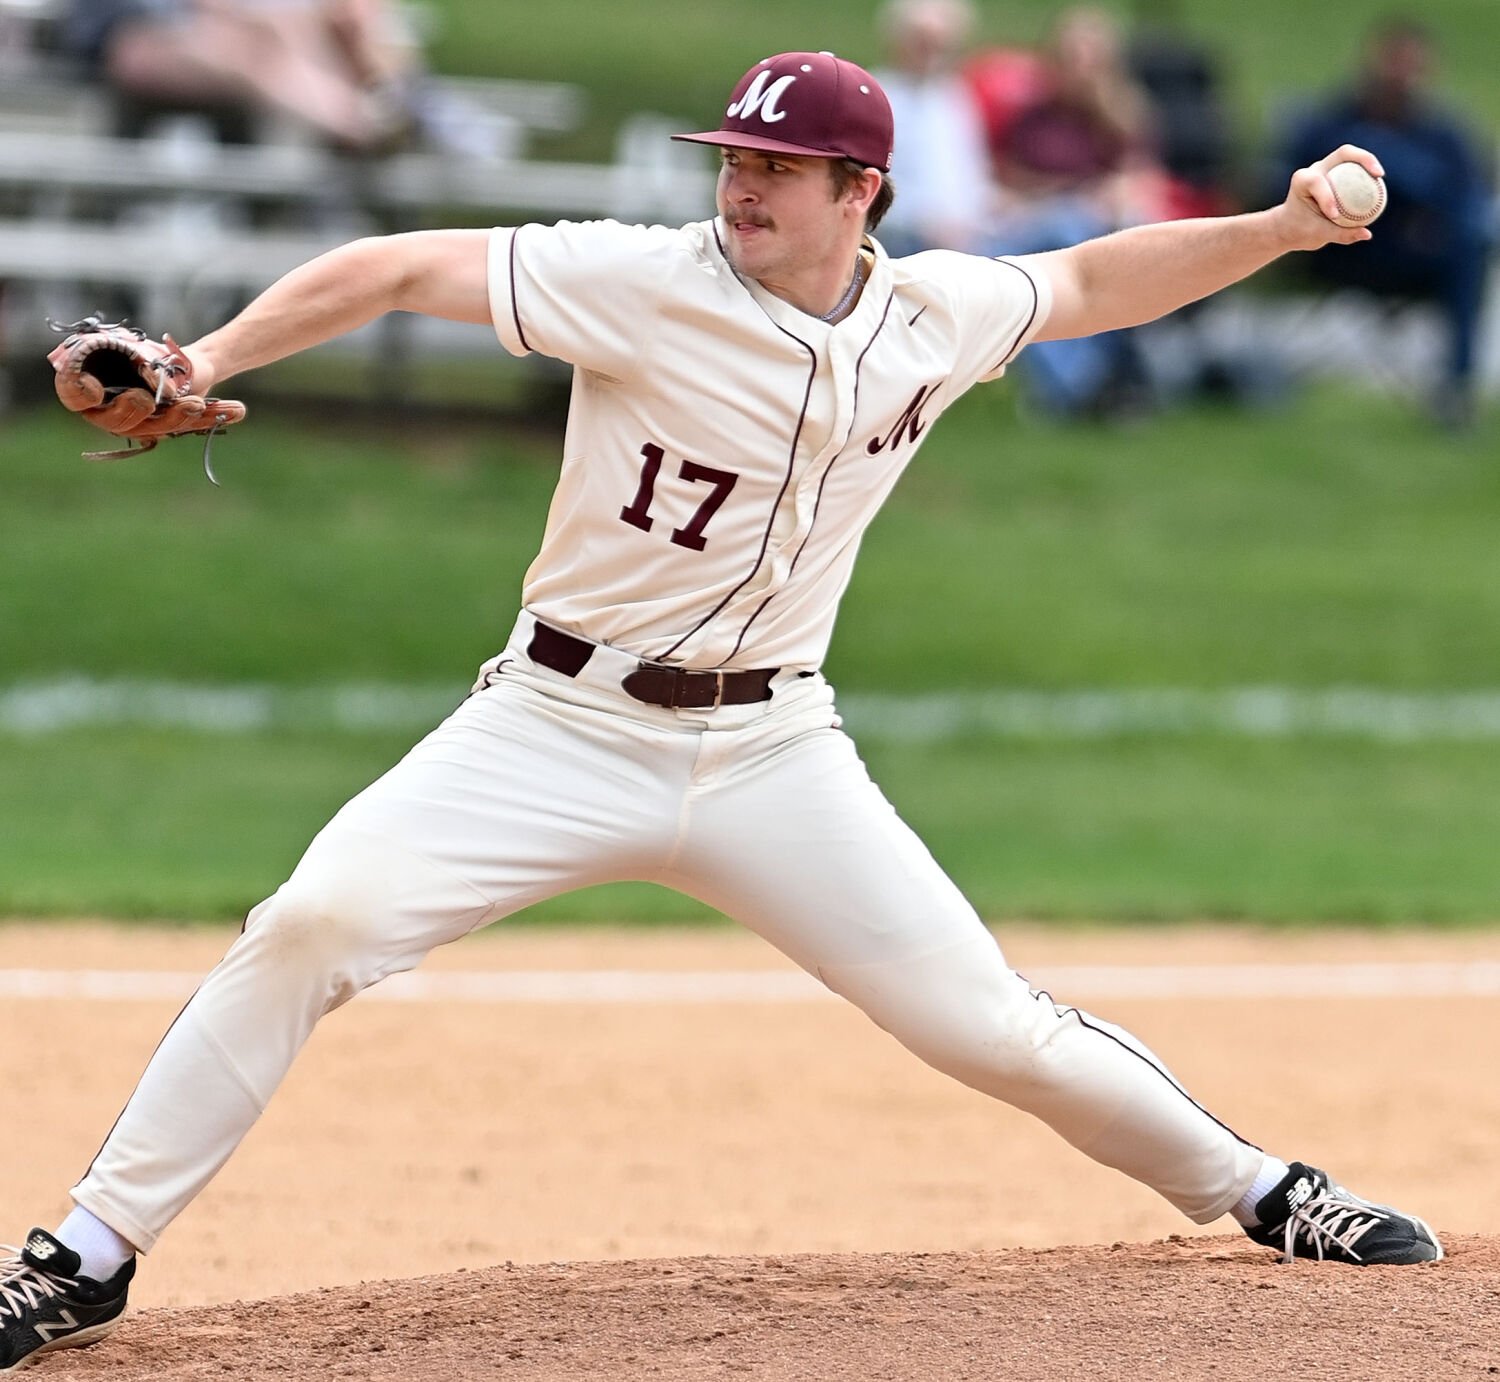 Mechanicsburg’s Reese Young Dominates in Complete-Game Victory; Carlisle Walks Off CD East